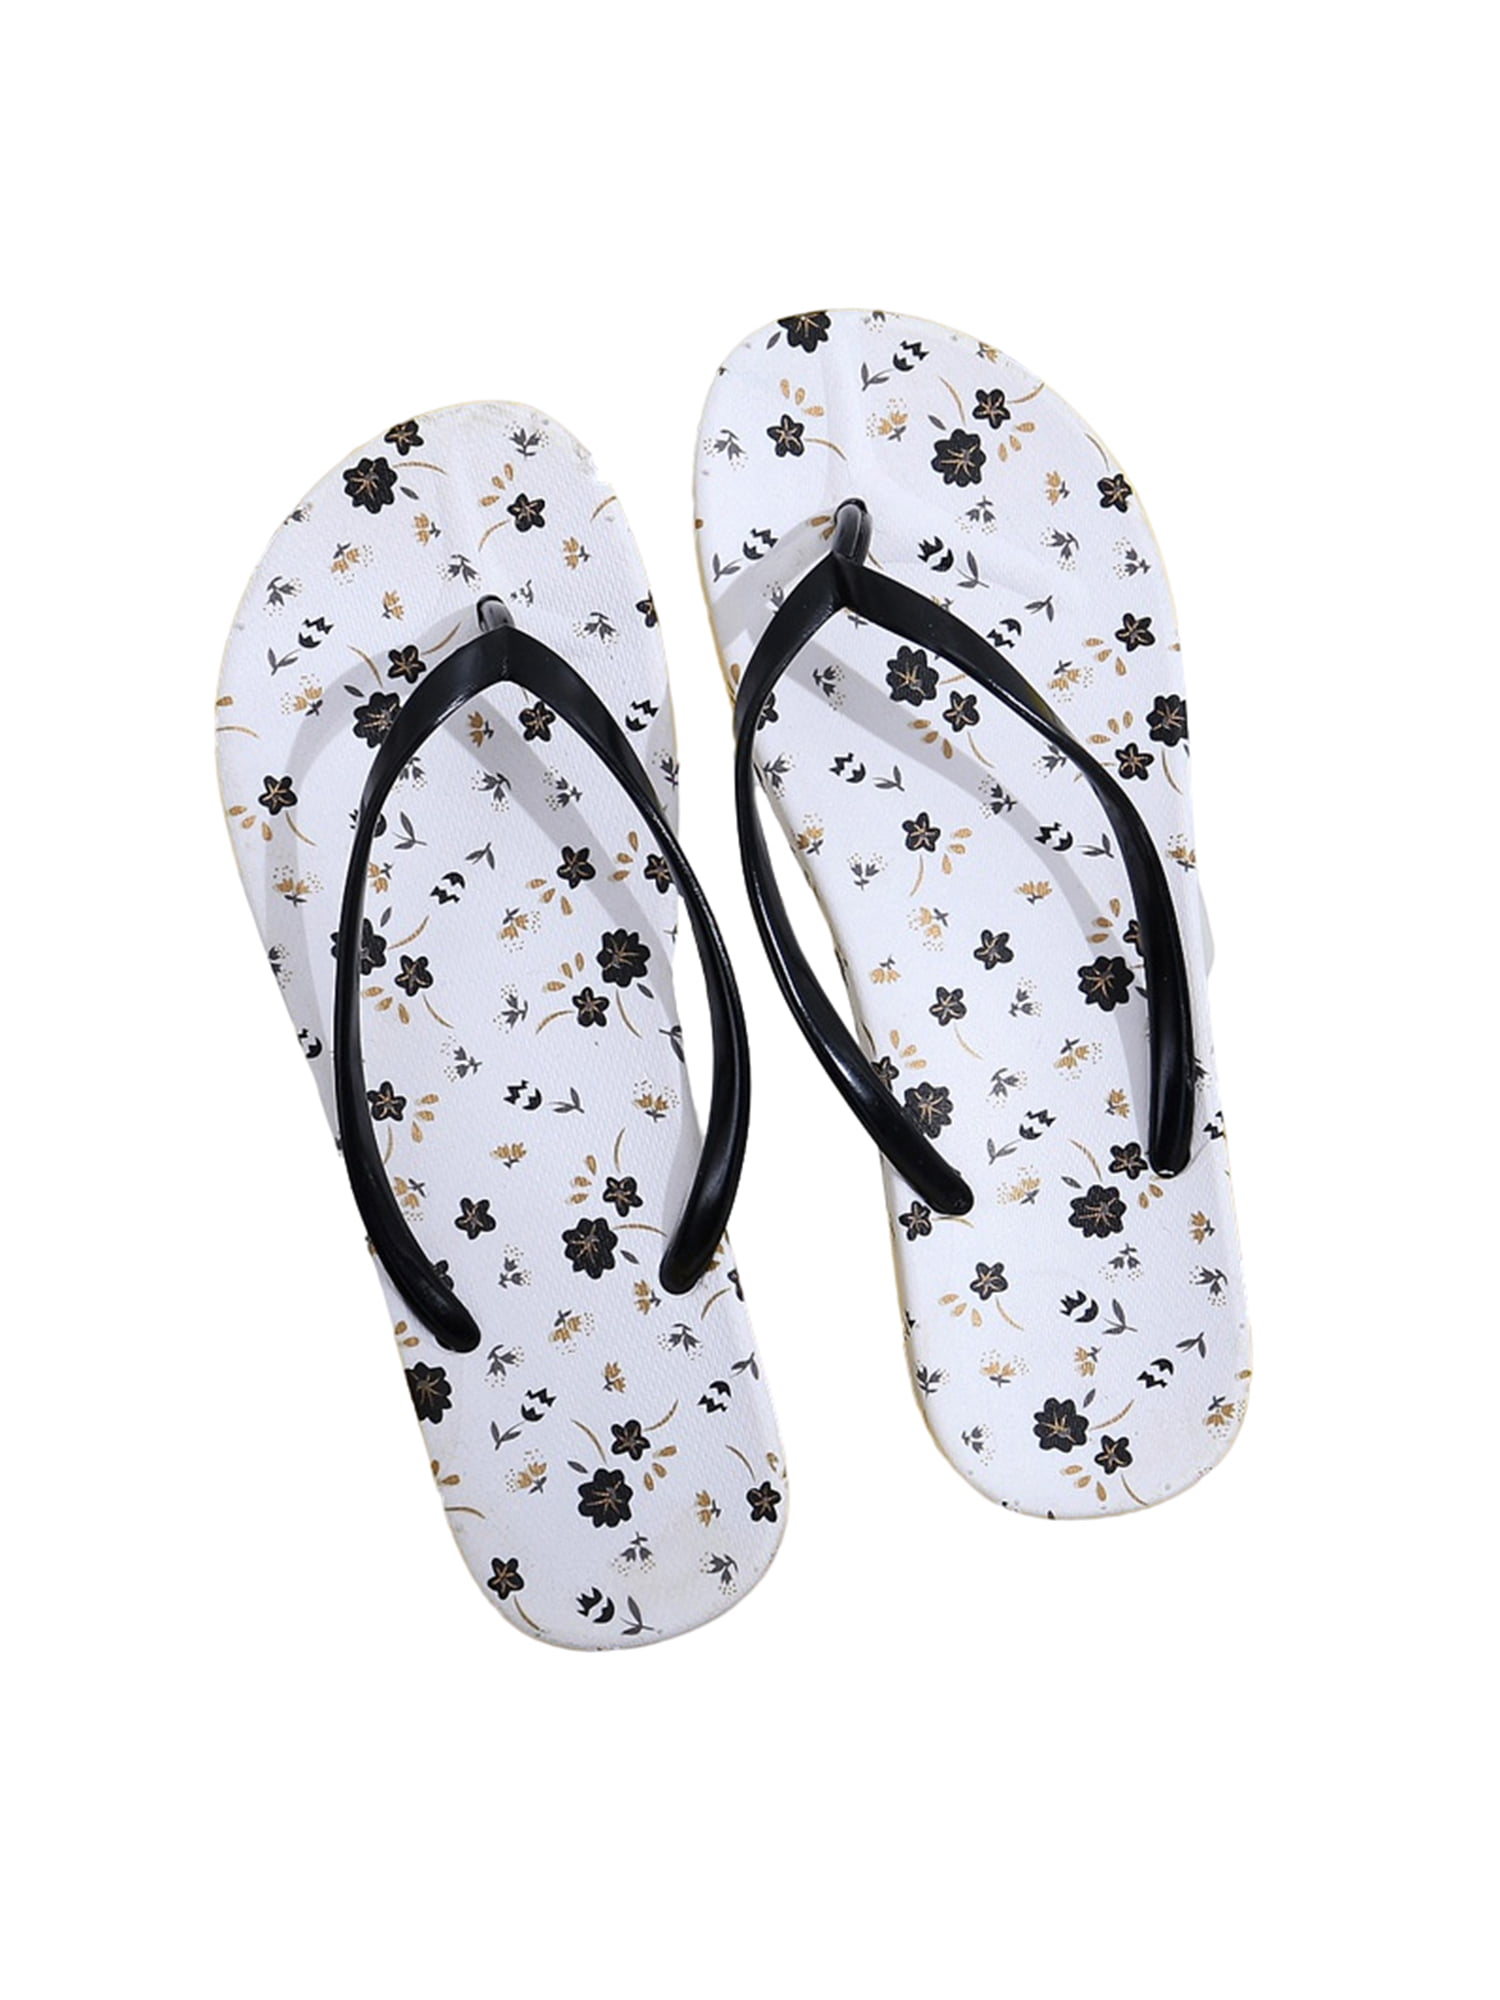 Women Sliders Woven Linen Slippers Summer Flat Sandals With Bow Floral Slip On Ladies Skidproof Casual Walking Holiday Wide Fit Beach Slides Indoor Outdoor